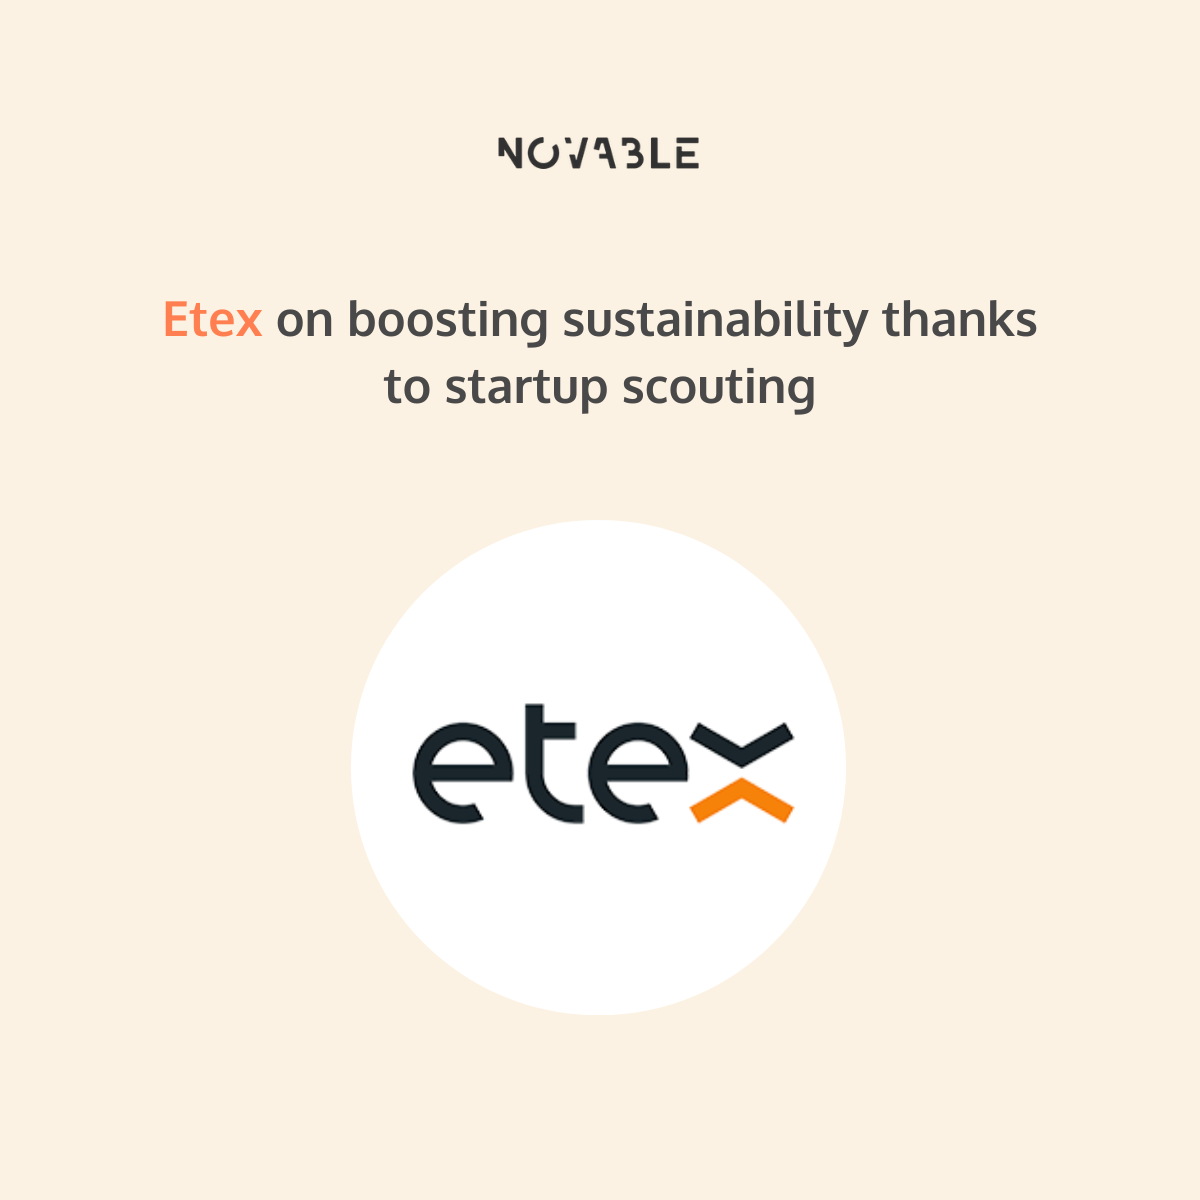 Etex startup scouting